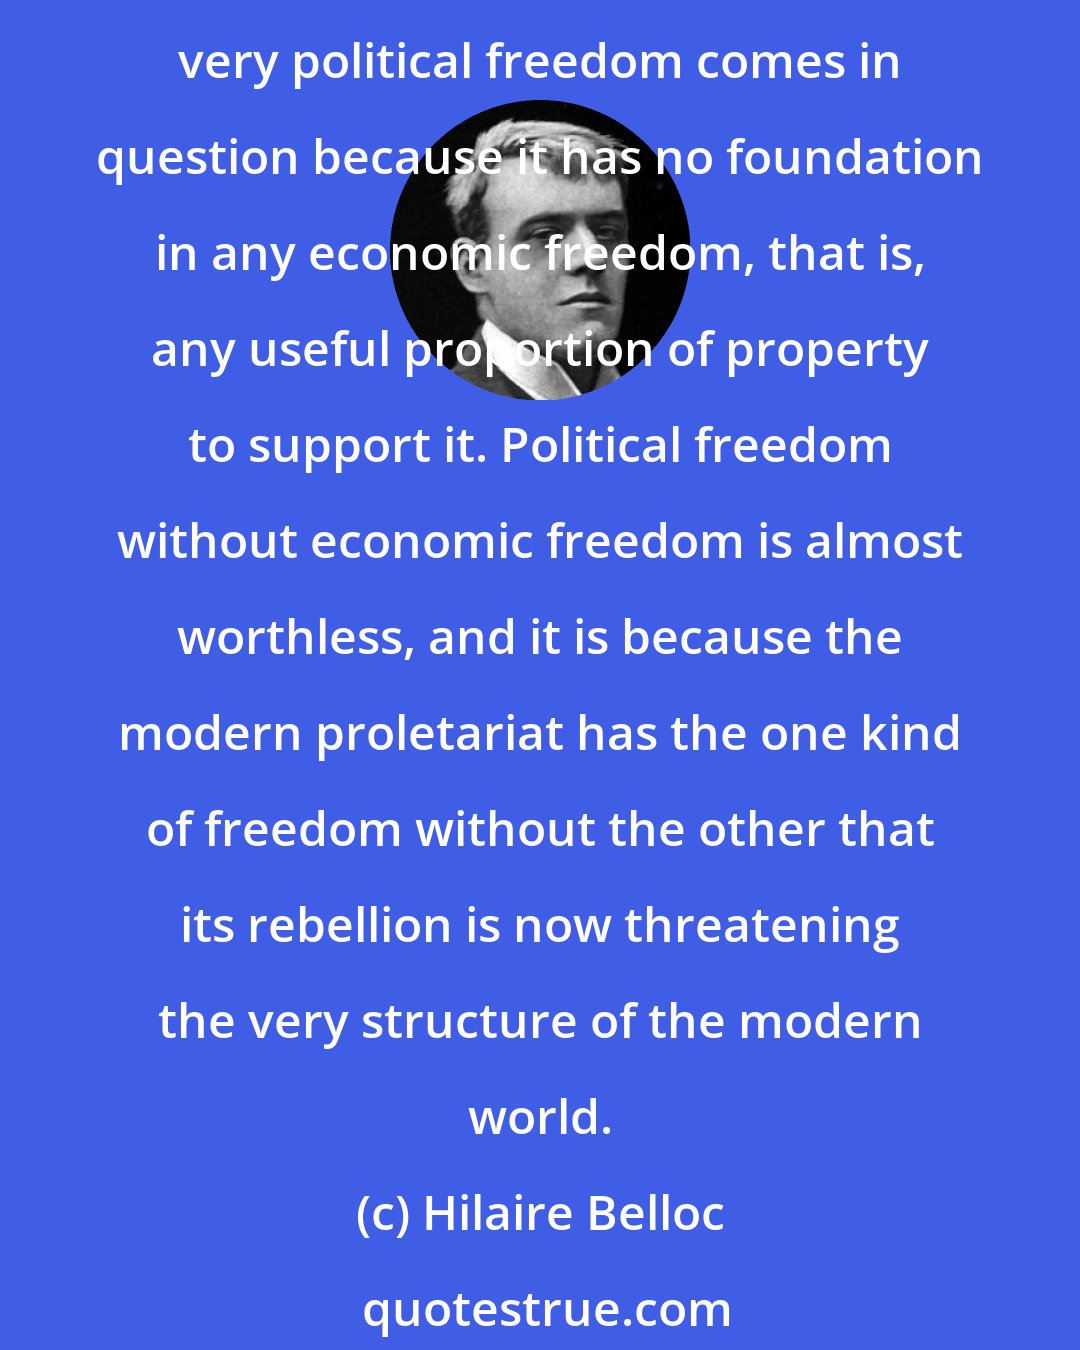 Hilaire Belloc: Coupled with Usury, Unrestricted Competition destroys the small man for the profit of the great and in so doing produces that mass of economically unfree citizens whose very political freedom comes in question because it has no foundation in any economic freedom, that is, any useful proportion of property to support it. Political freedom without economic freedom is almost worthless, and it is because the modern proletariat has the one kind of freedom without the other that its rebellion is now threatening the very structure of the modern world.